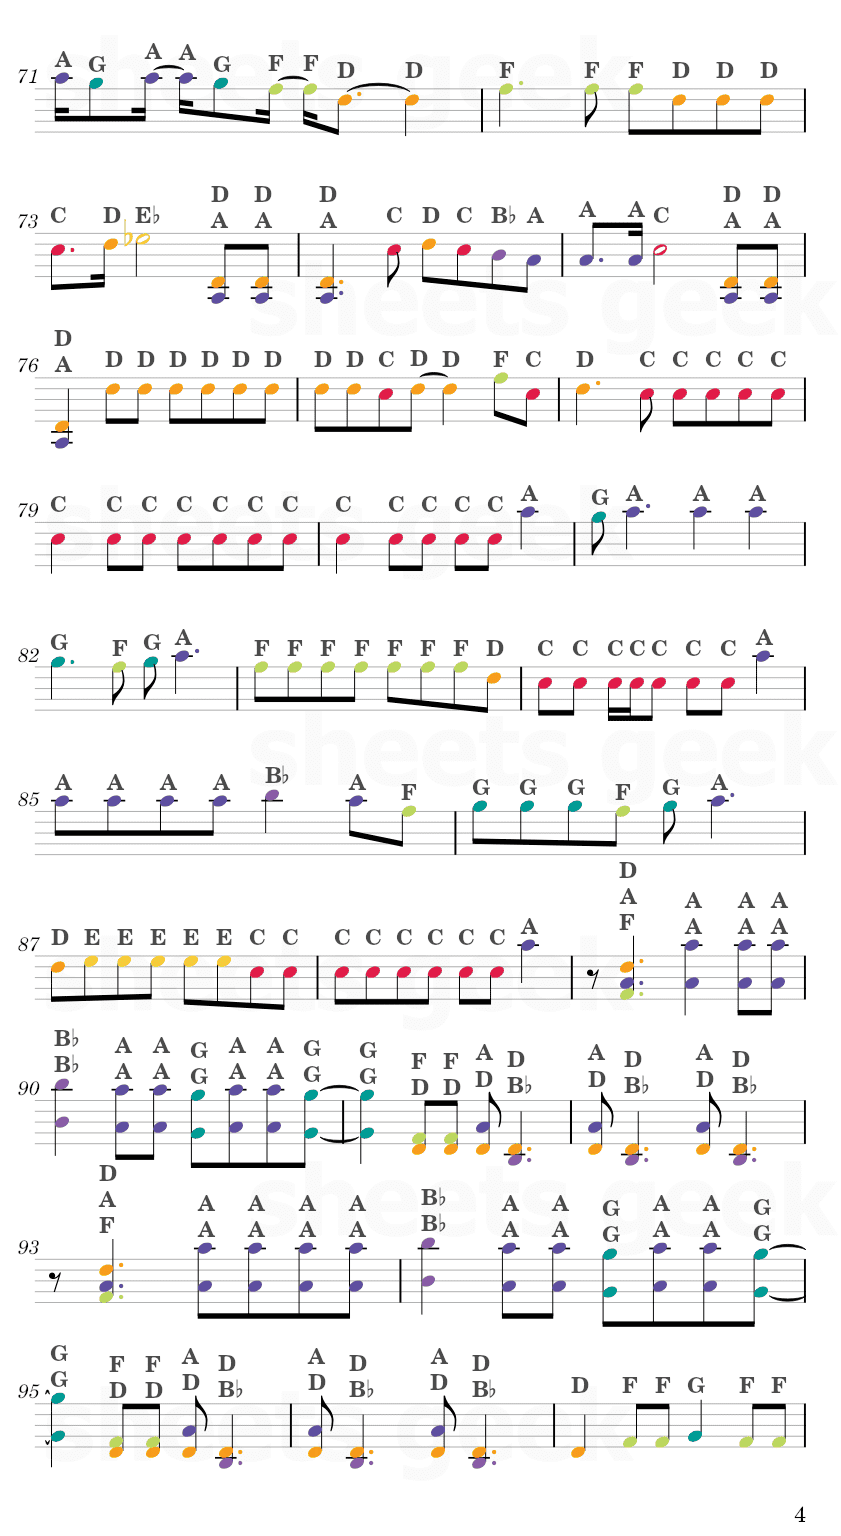 Sticker - NCT 127 Easy Sheet Music Free for piano, keyboard, flute, violin, sax, cello page 4